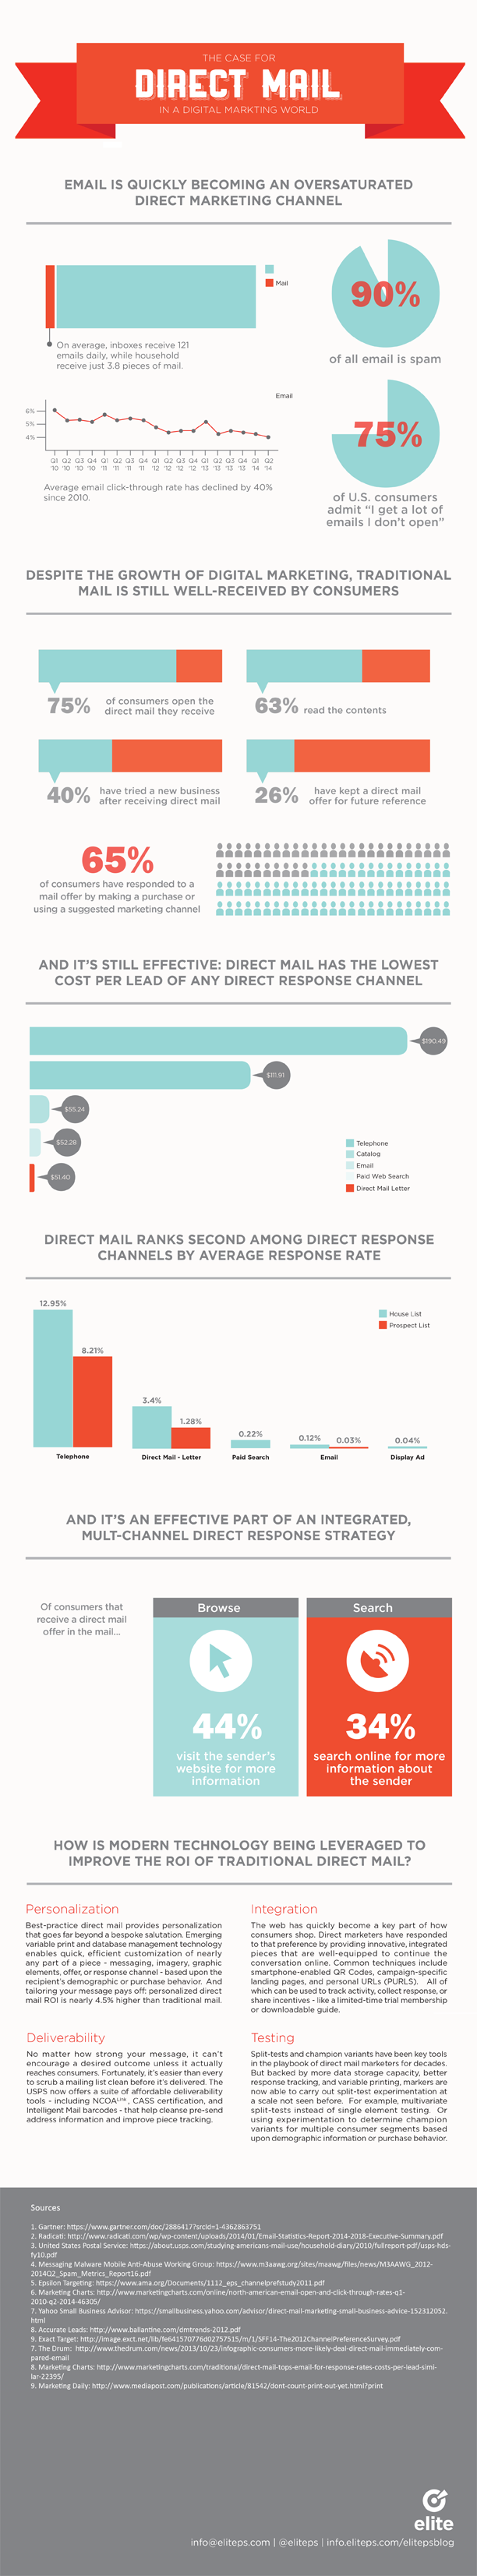 direct mail infographic